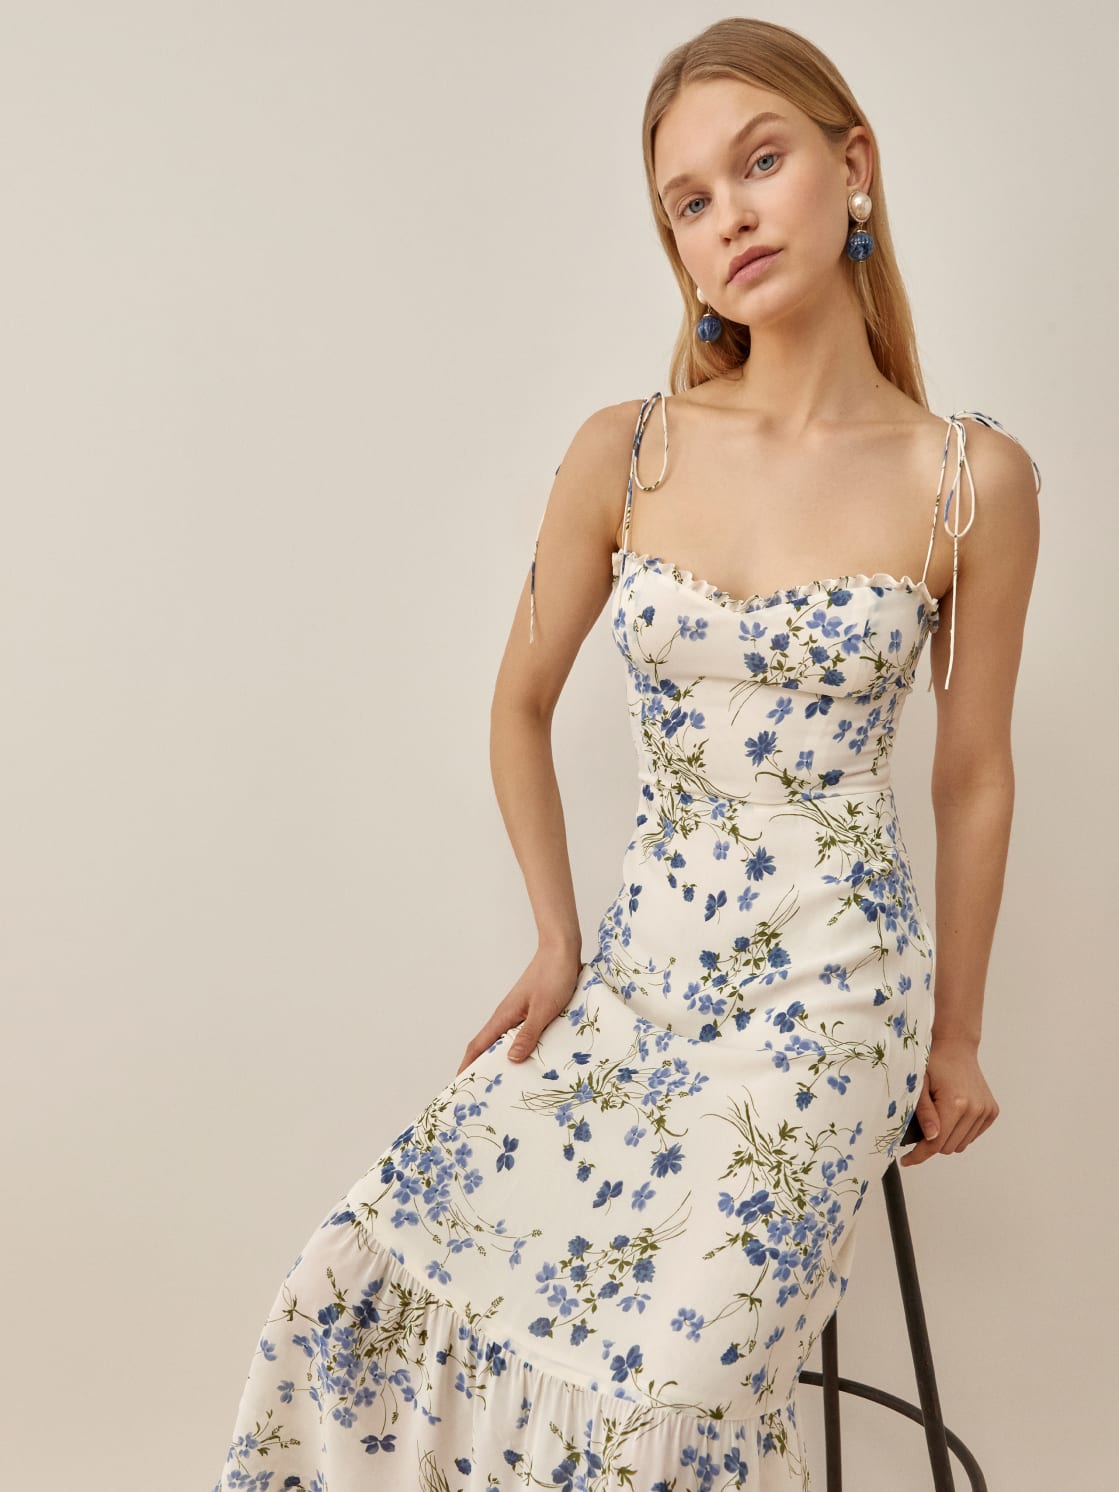 The Best Reformation Wedding Guest Dresses 2022 | Who What Wear UK